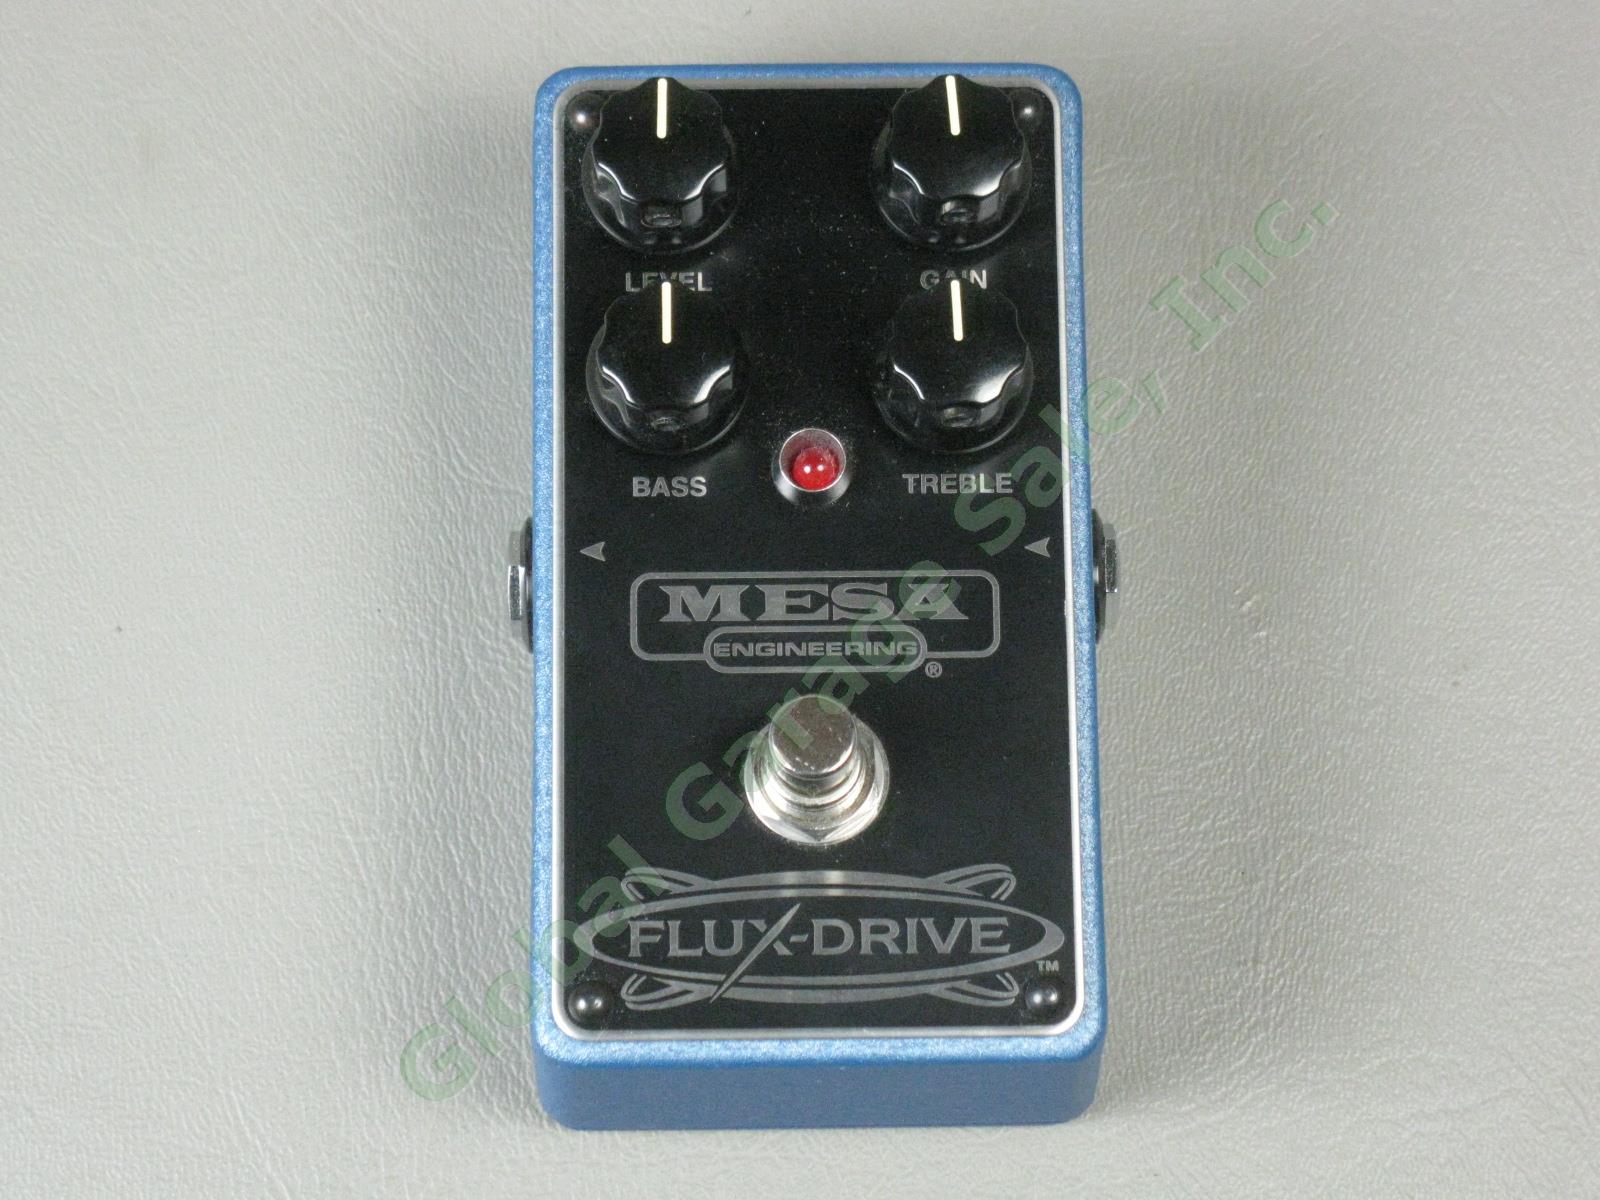 MINT! Mesa Boogie Flux-Drive Overdrive Guitar Effects Pedal Made In USA 1 Owner